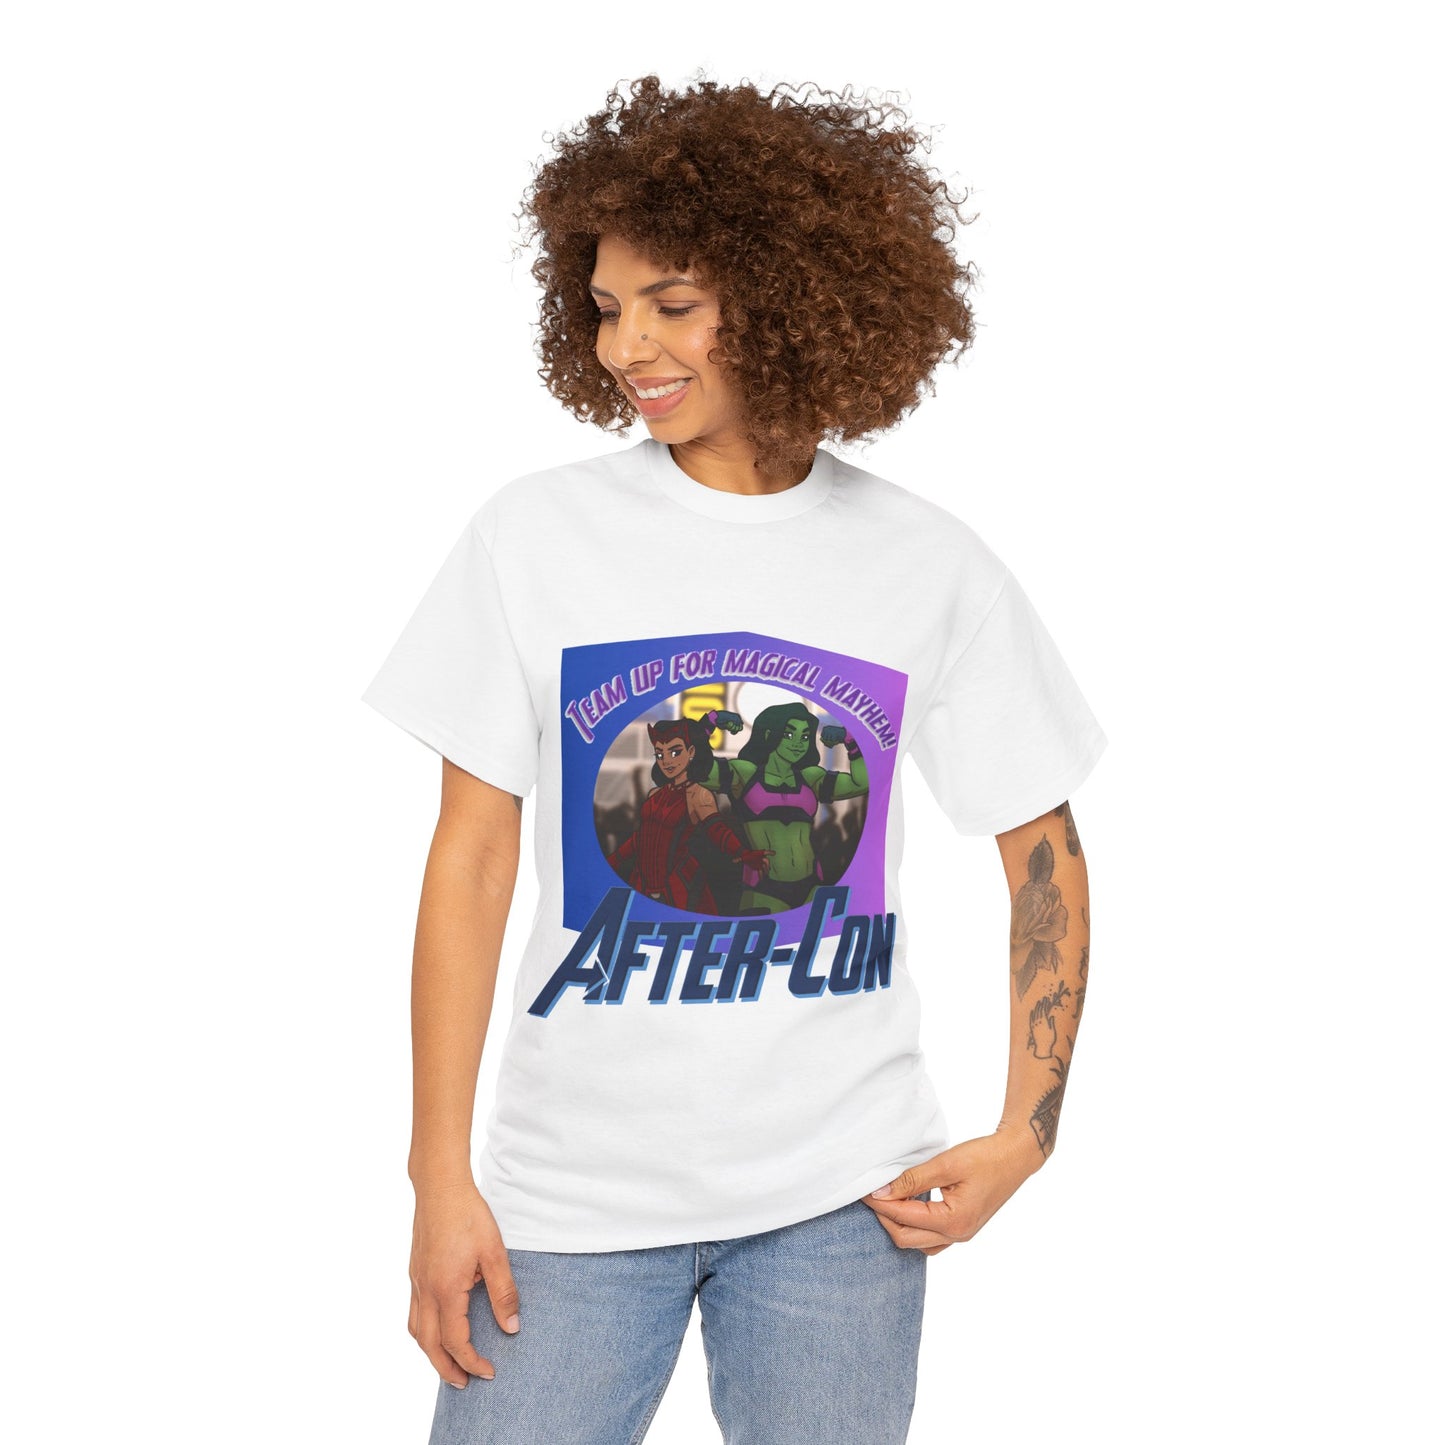 After-Con "Team Up" Unisex Heavy Cotton Tee